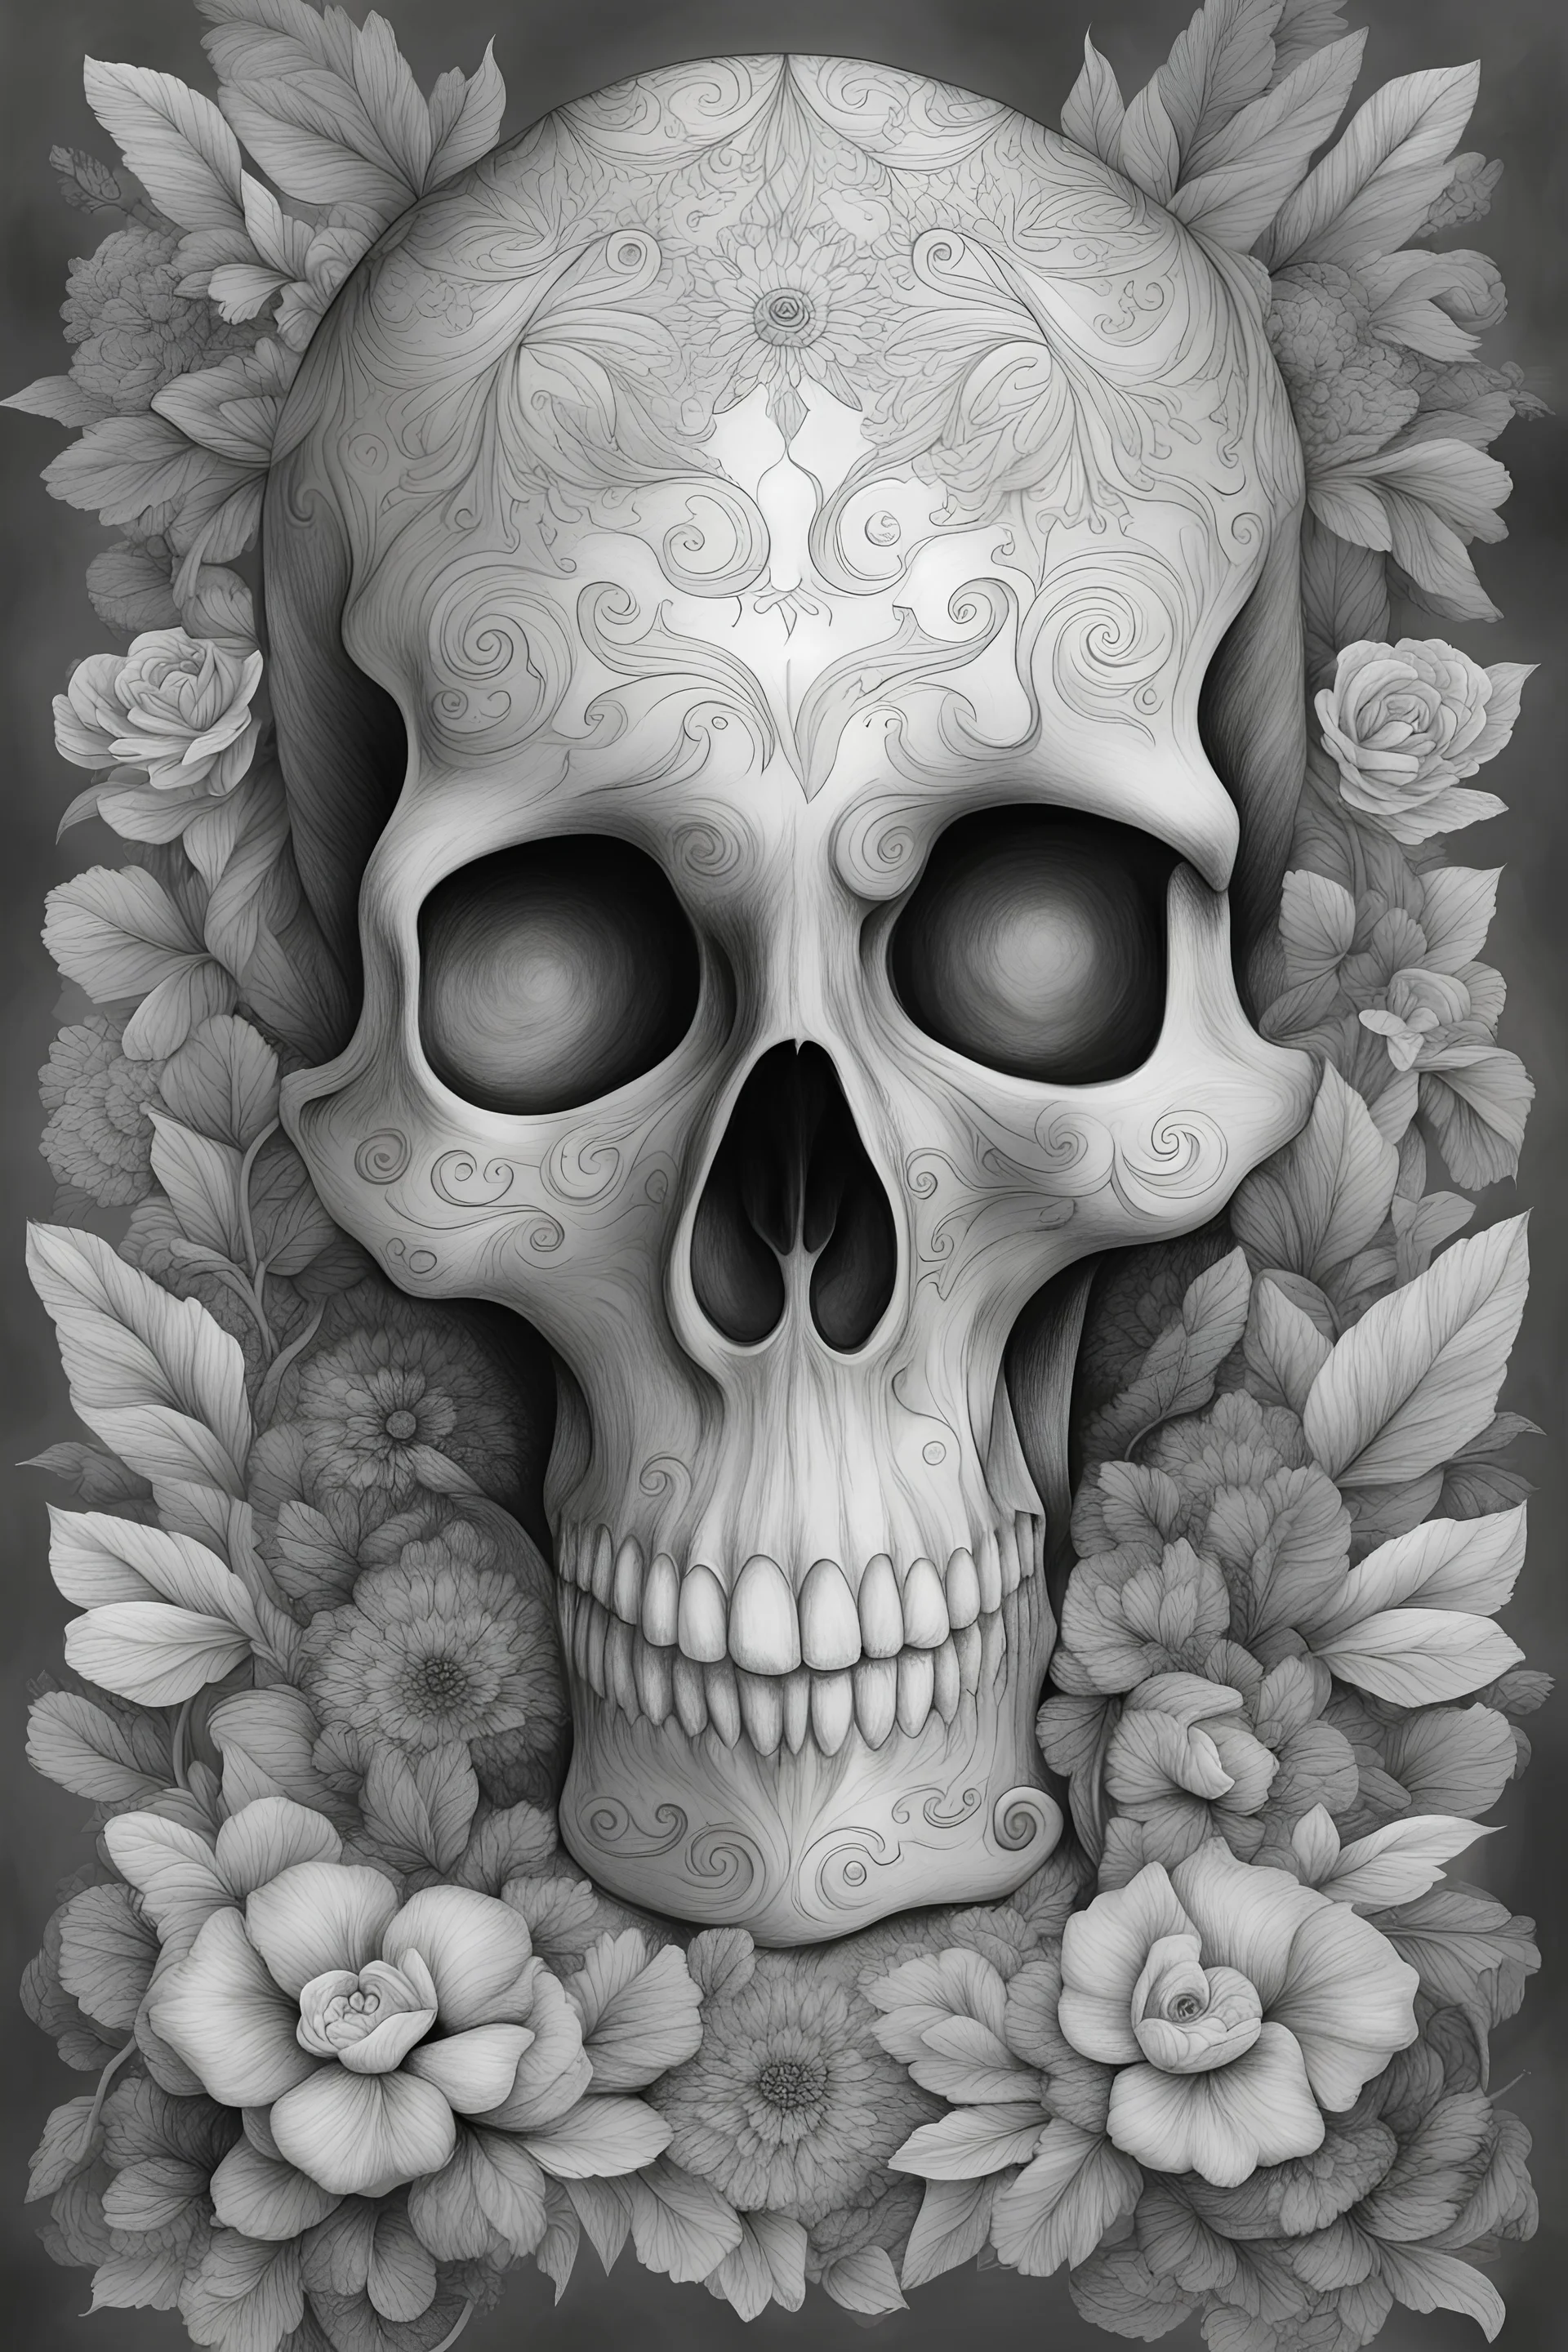 Skull | Mariola Budek - Premium Coloring Page | Printable Adult Colouring Pages Book Instant Download Grayscale